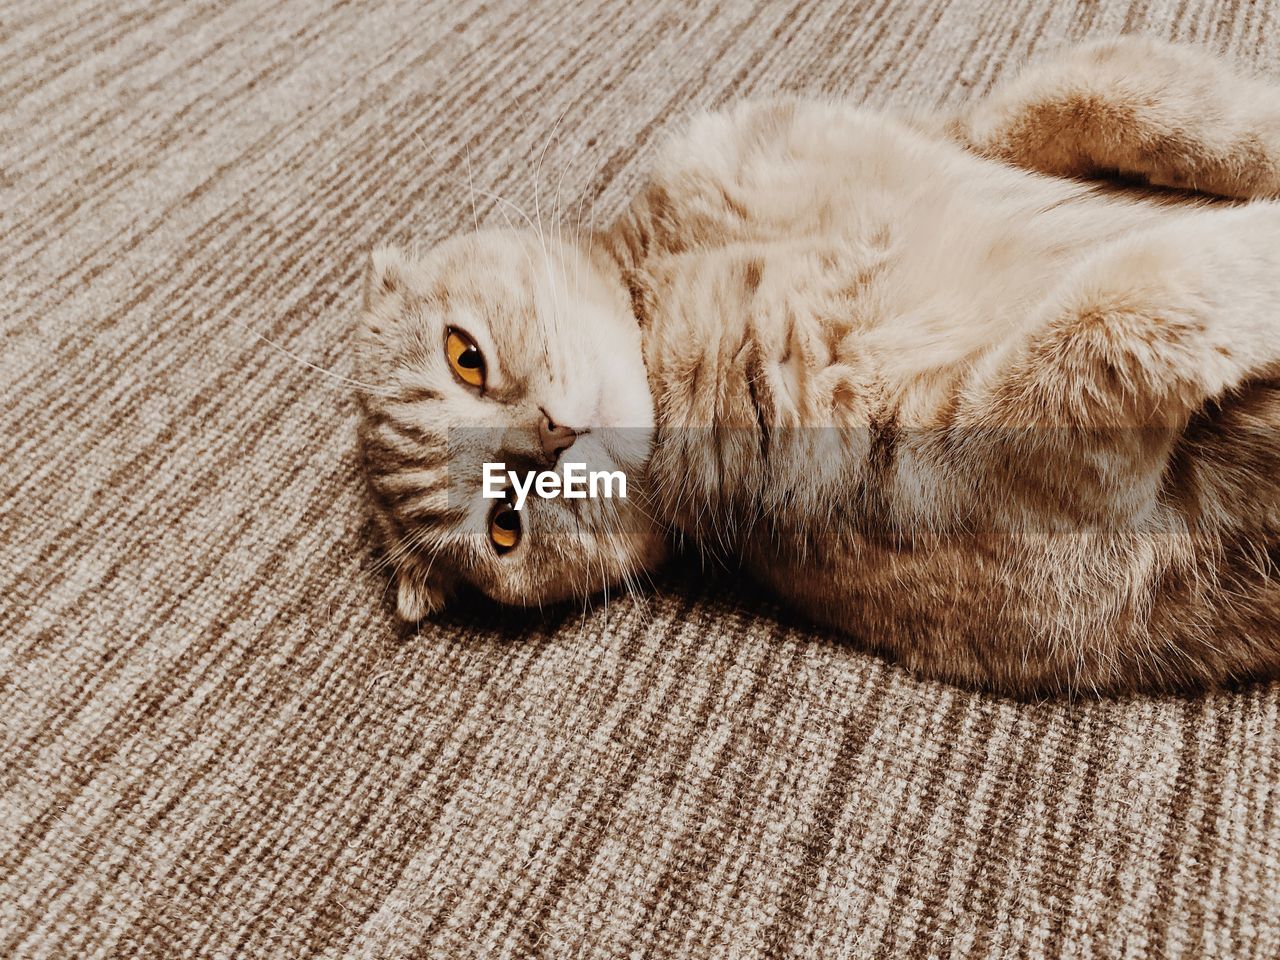 High angle view of a cat resting